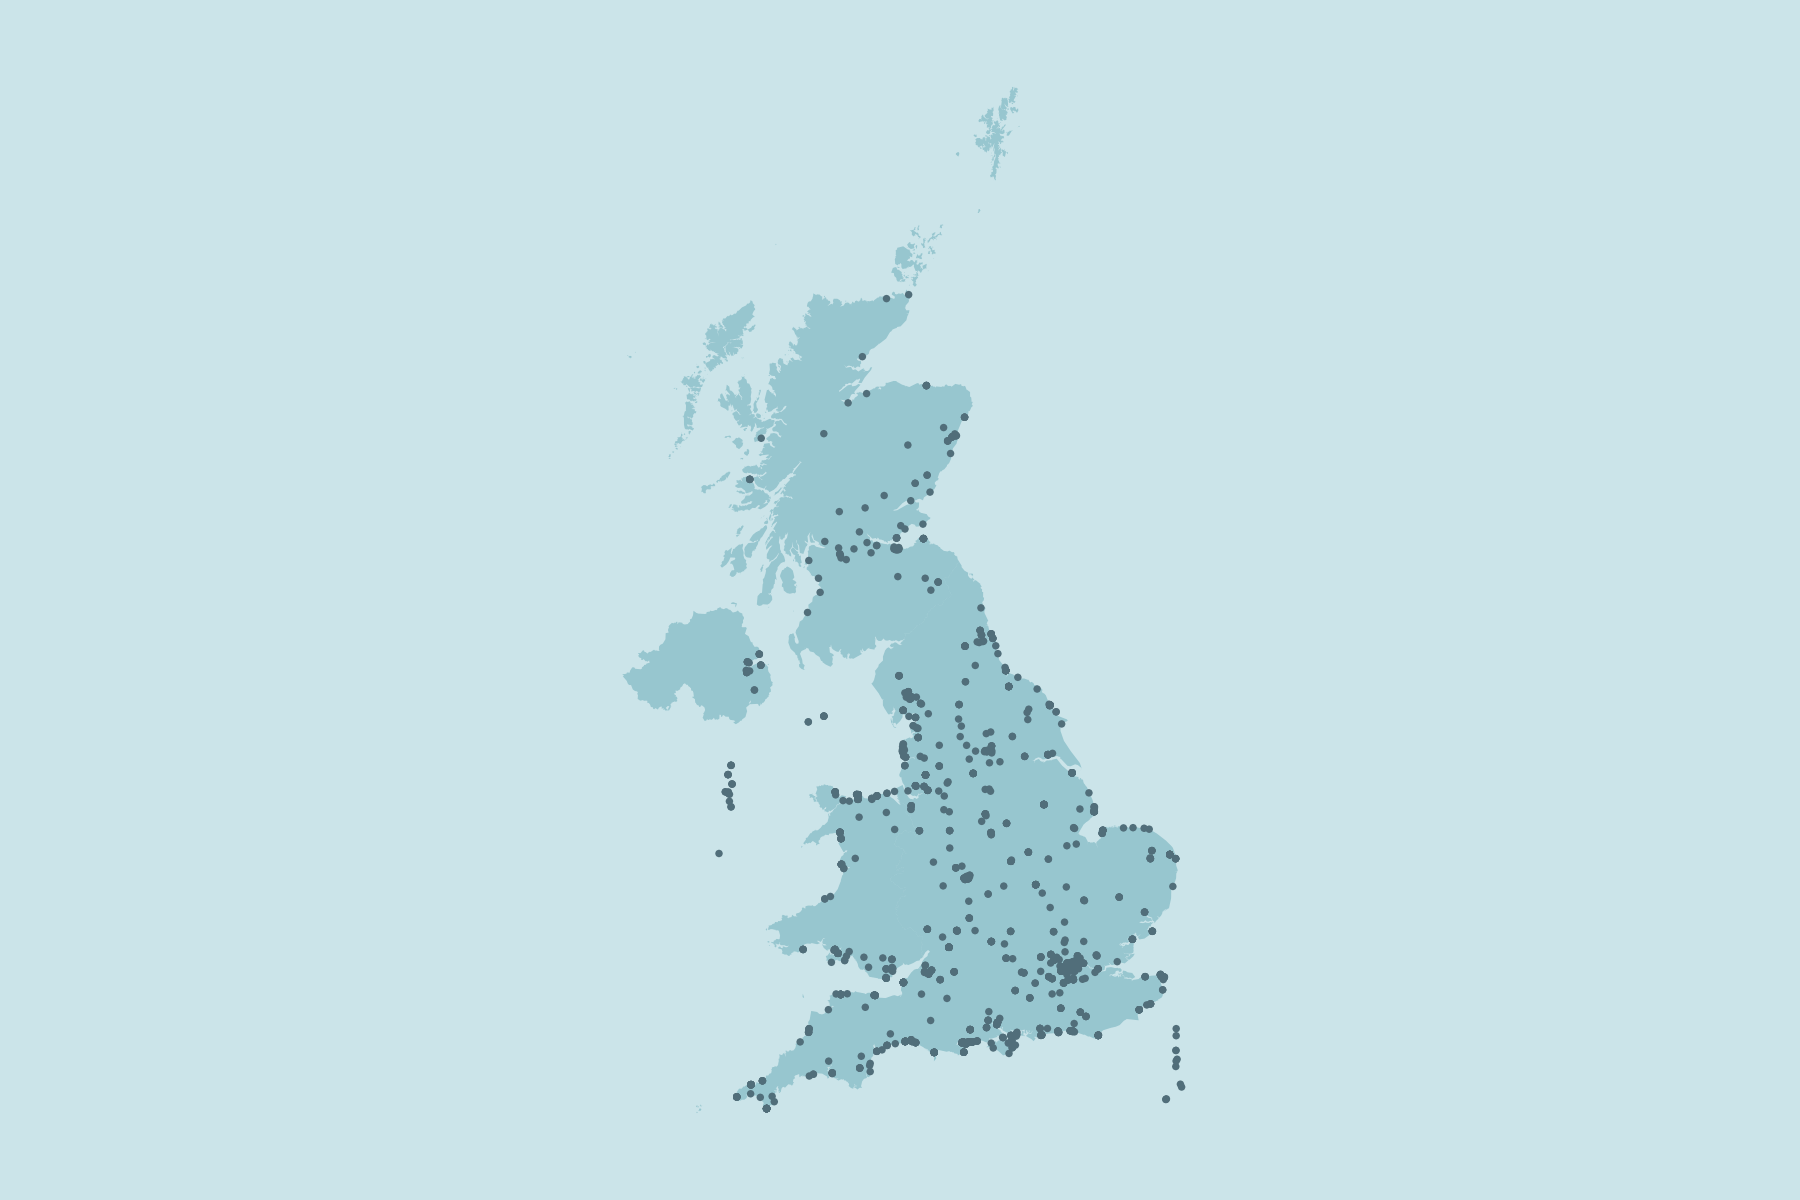 Map of ice-cream locations in the UK.